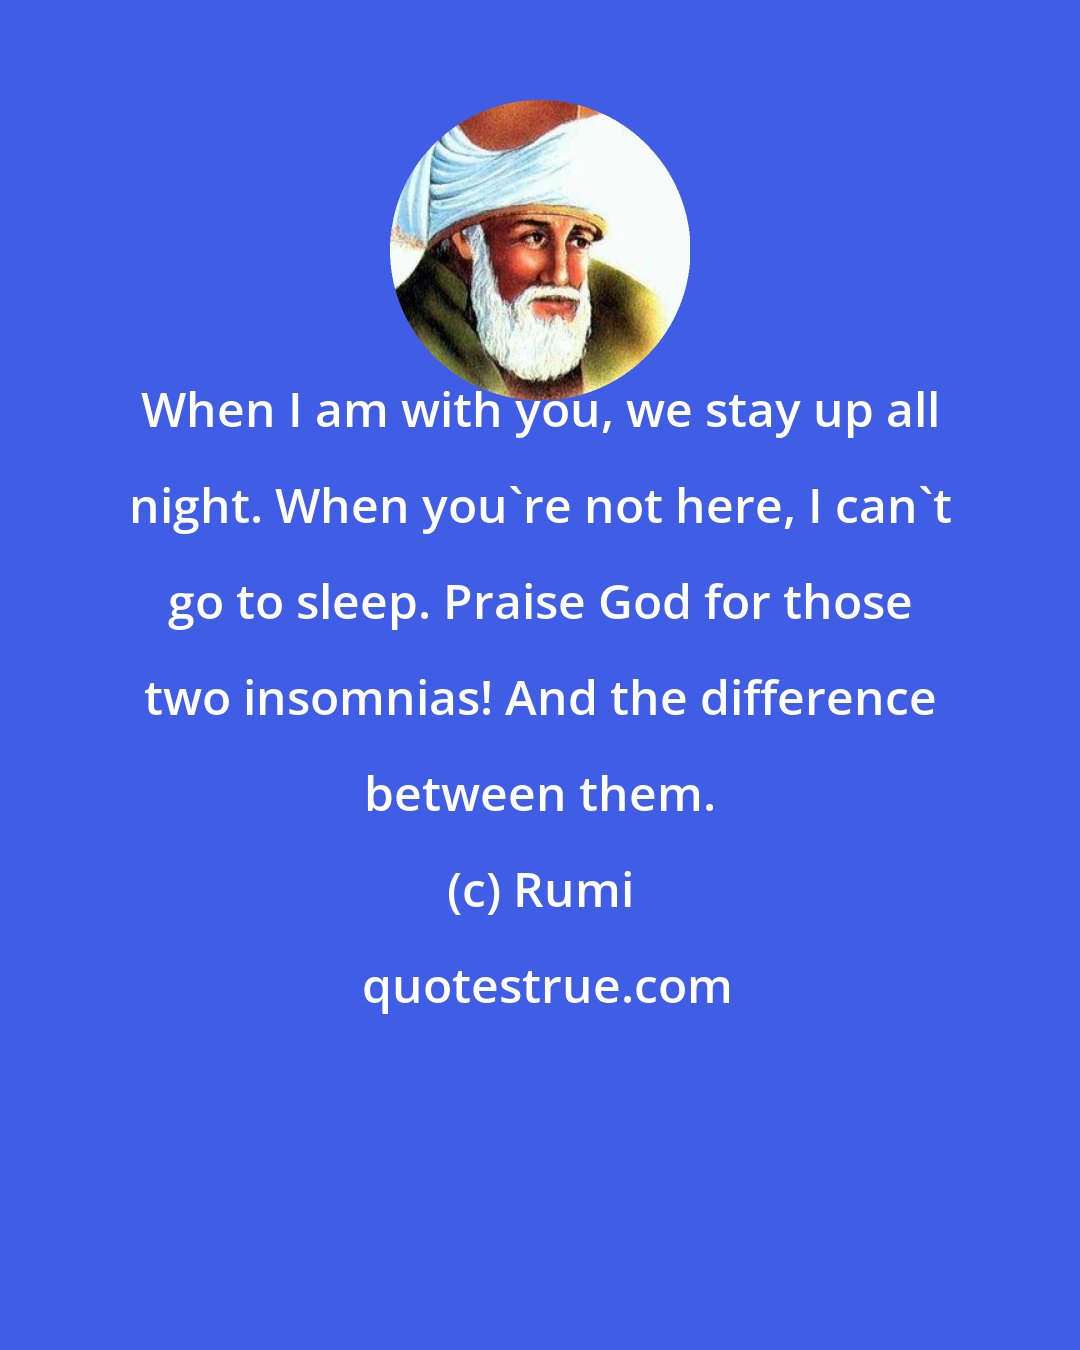 Rumi: When I am with you, we stay up all night. When you're not here, I can't go to sleep. Praise God for those two insomnias! And the difference between them.